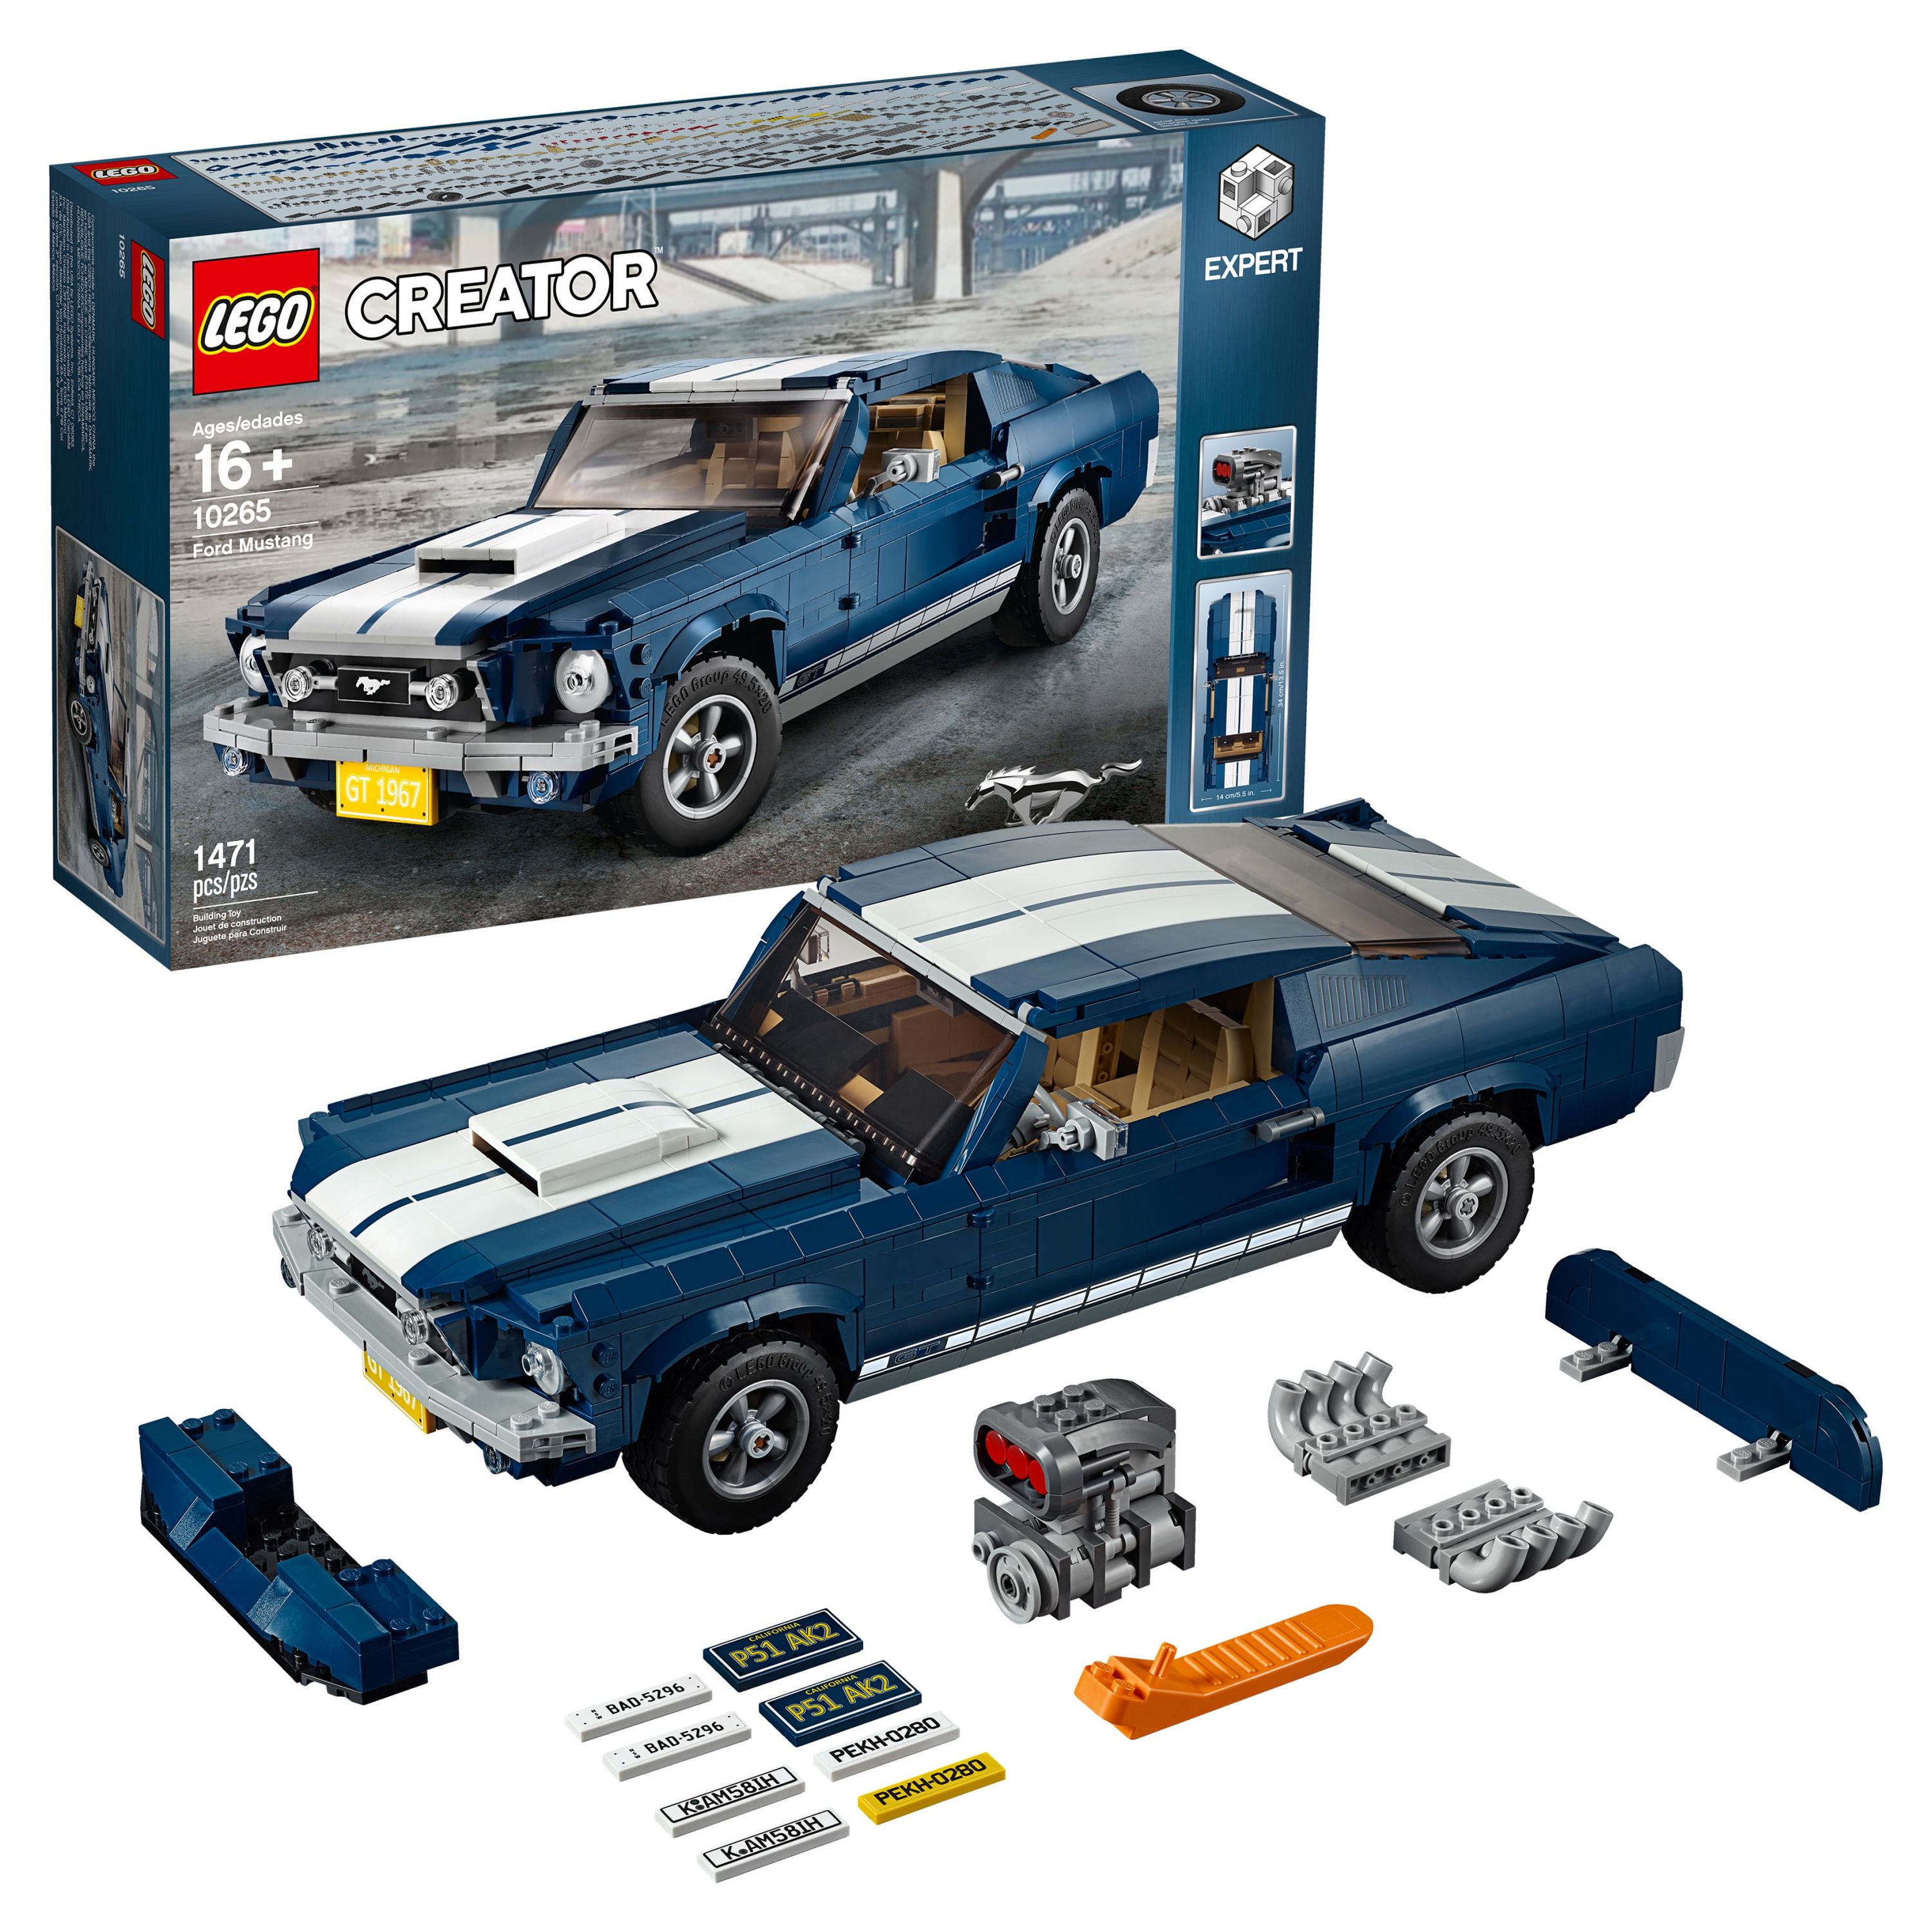 LEGO Creator Expert Ford Mustang 10265 Building Set - Exclusive Advanced Collector's Car Model, Featuring Detailed Interior, V8 Engine, Home and Office Display, Collectible for Adults and Teens - image 1 of 6